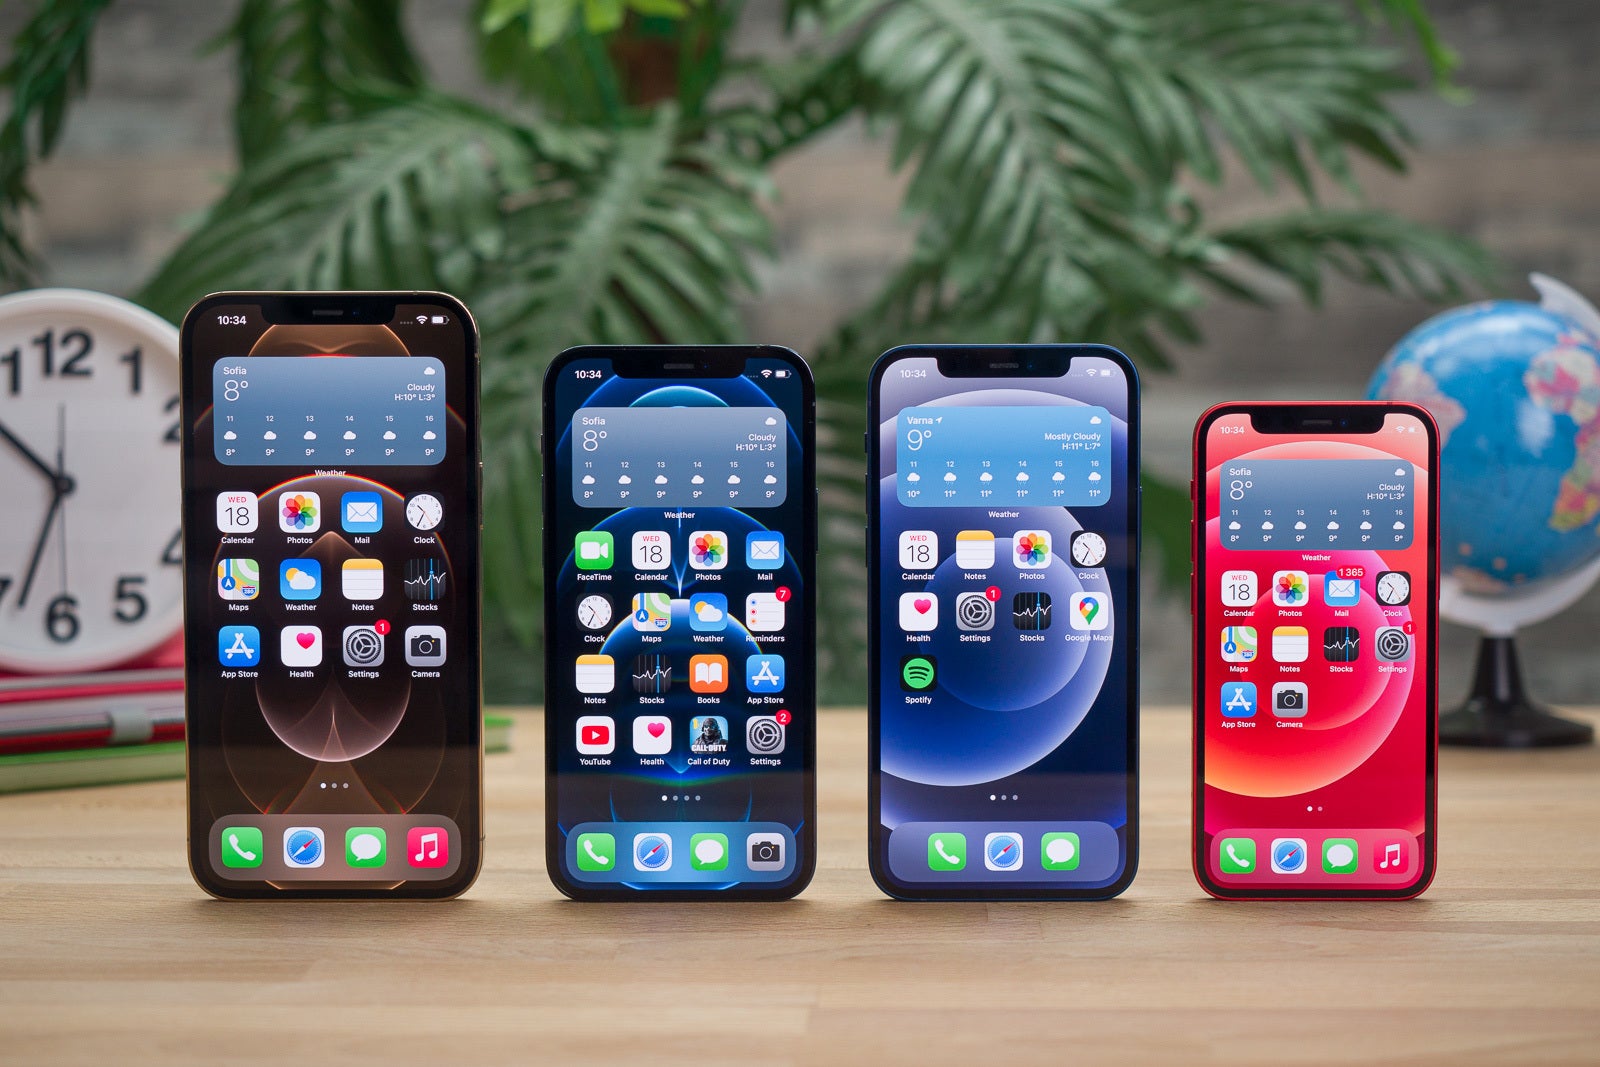 iOS 14 widgets running on the iPhone 12 family - Apple's WWDC 2021 event kicks off June 7, and iOS 15 is expected